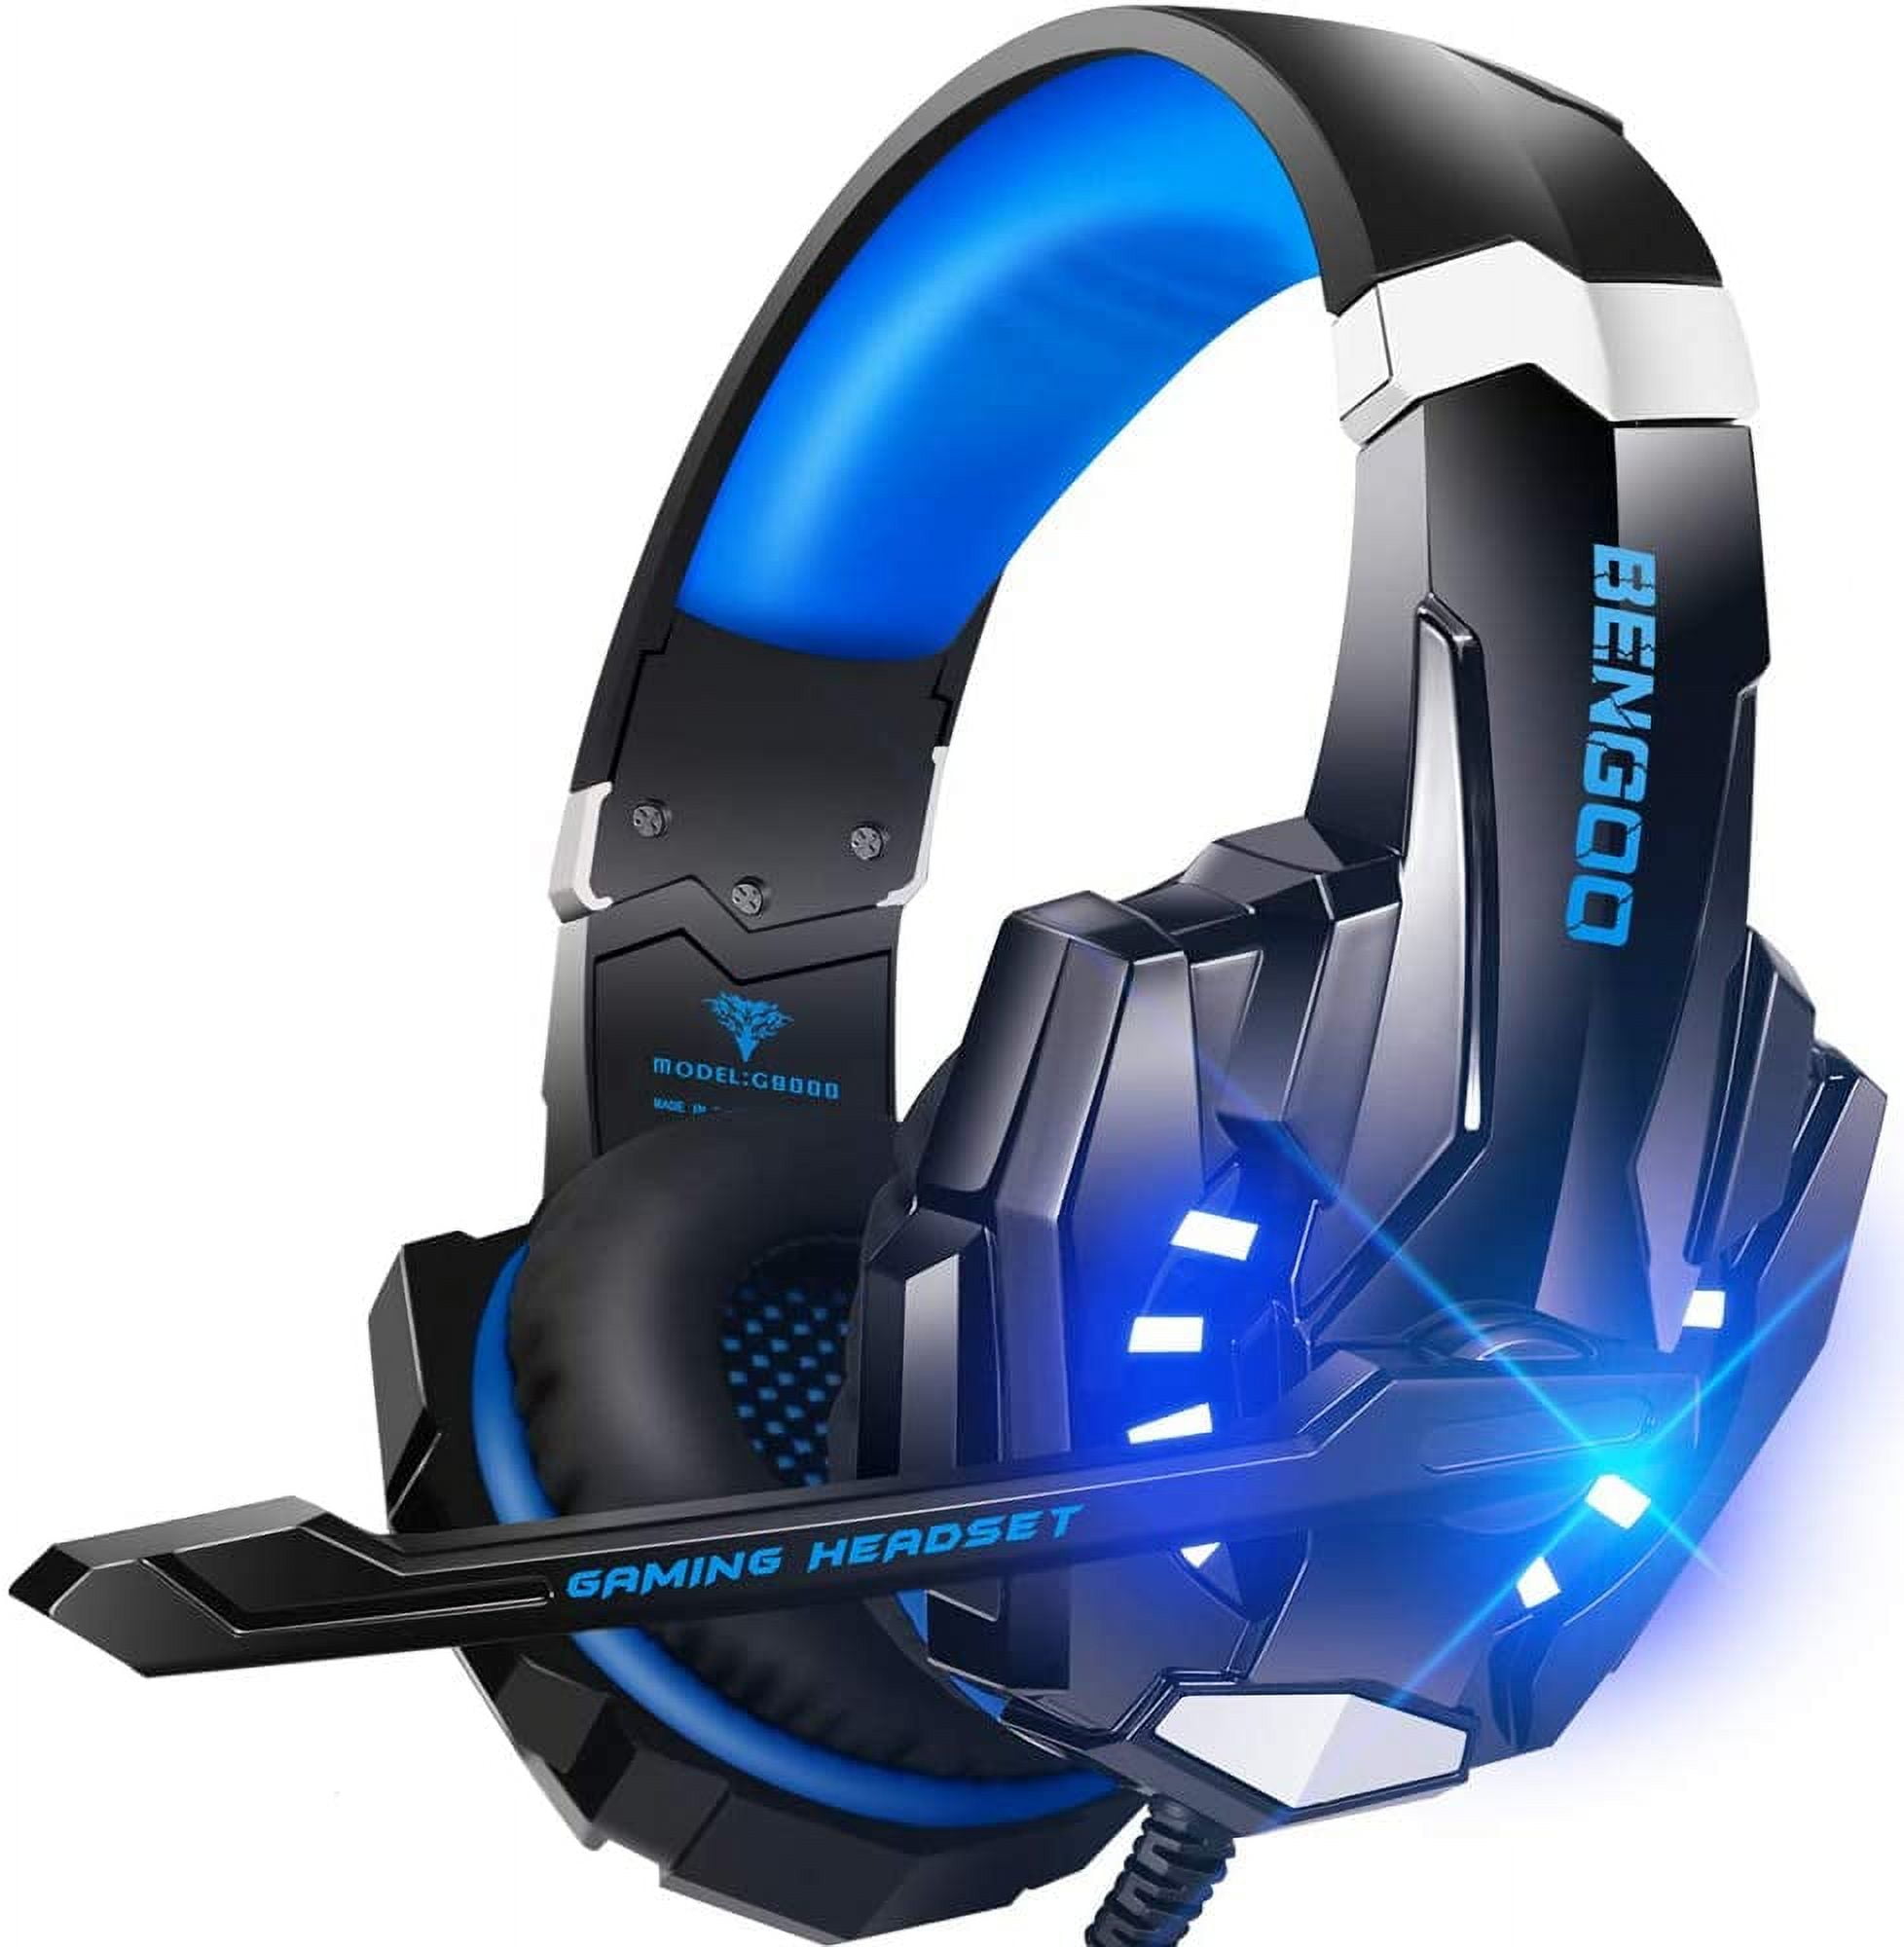 SPBPQY G9000 Stereo Gaming Headset for PS4 PC Xbox One PS5 Controller,  Noise Cancelling Over Ear Headphones with Mic, LED Light, Bass Surround,  Soft